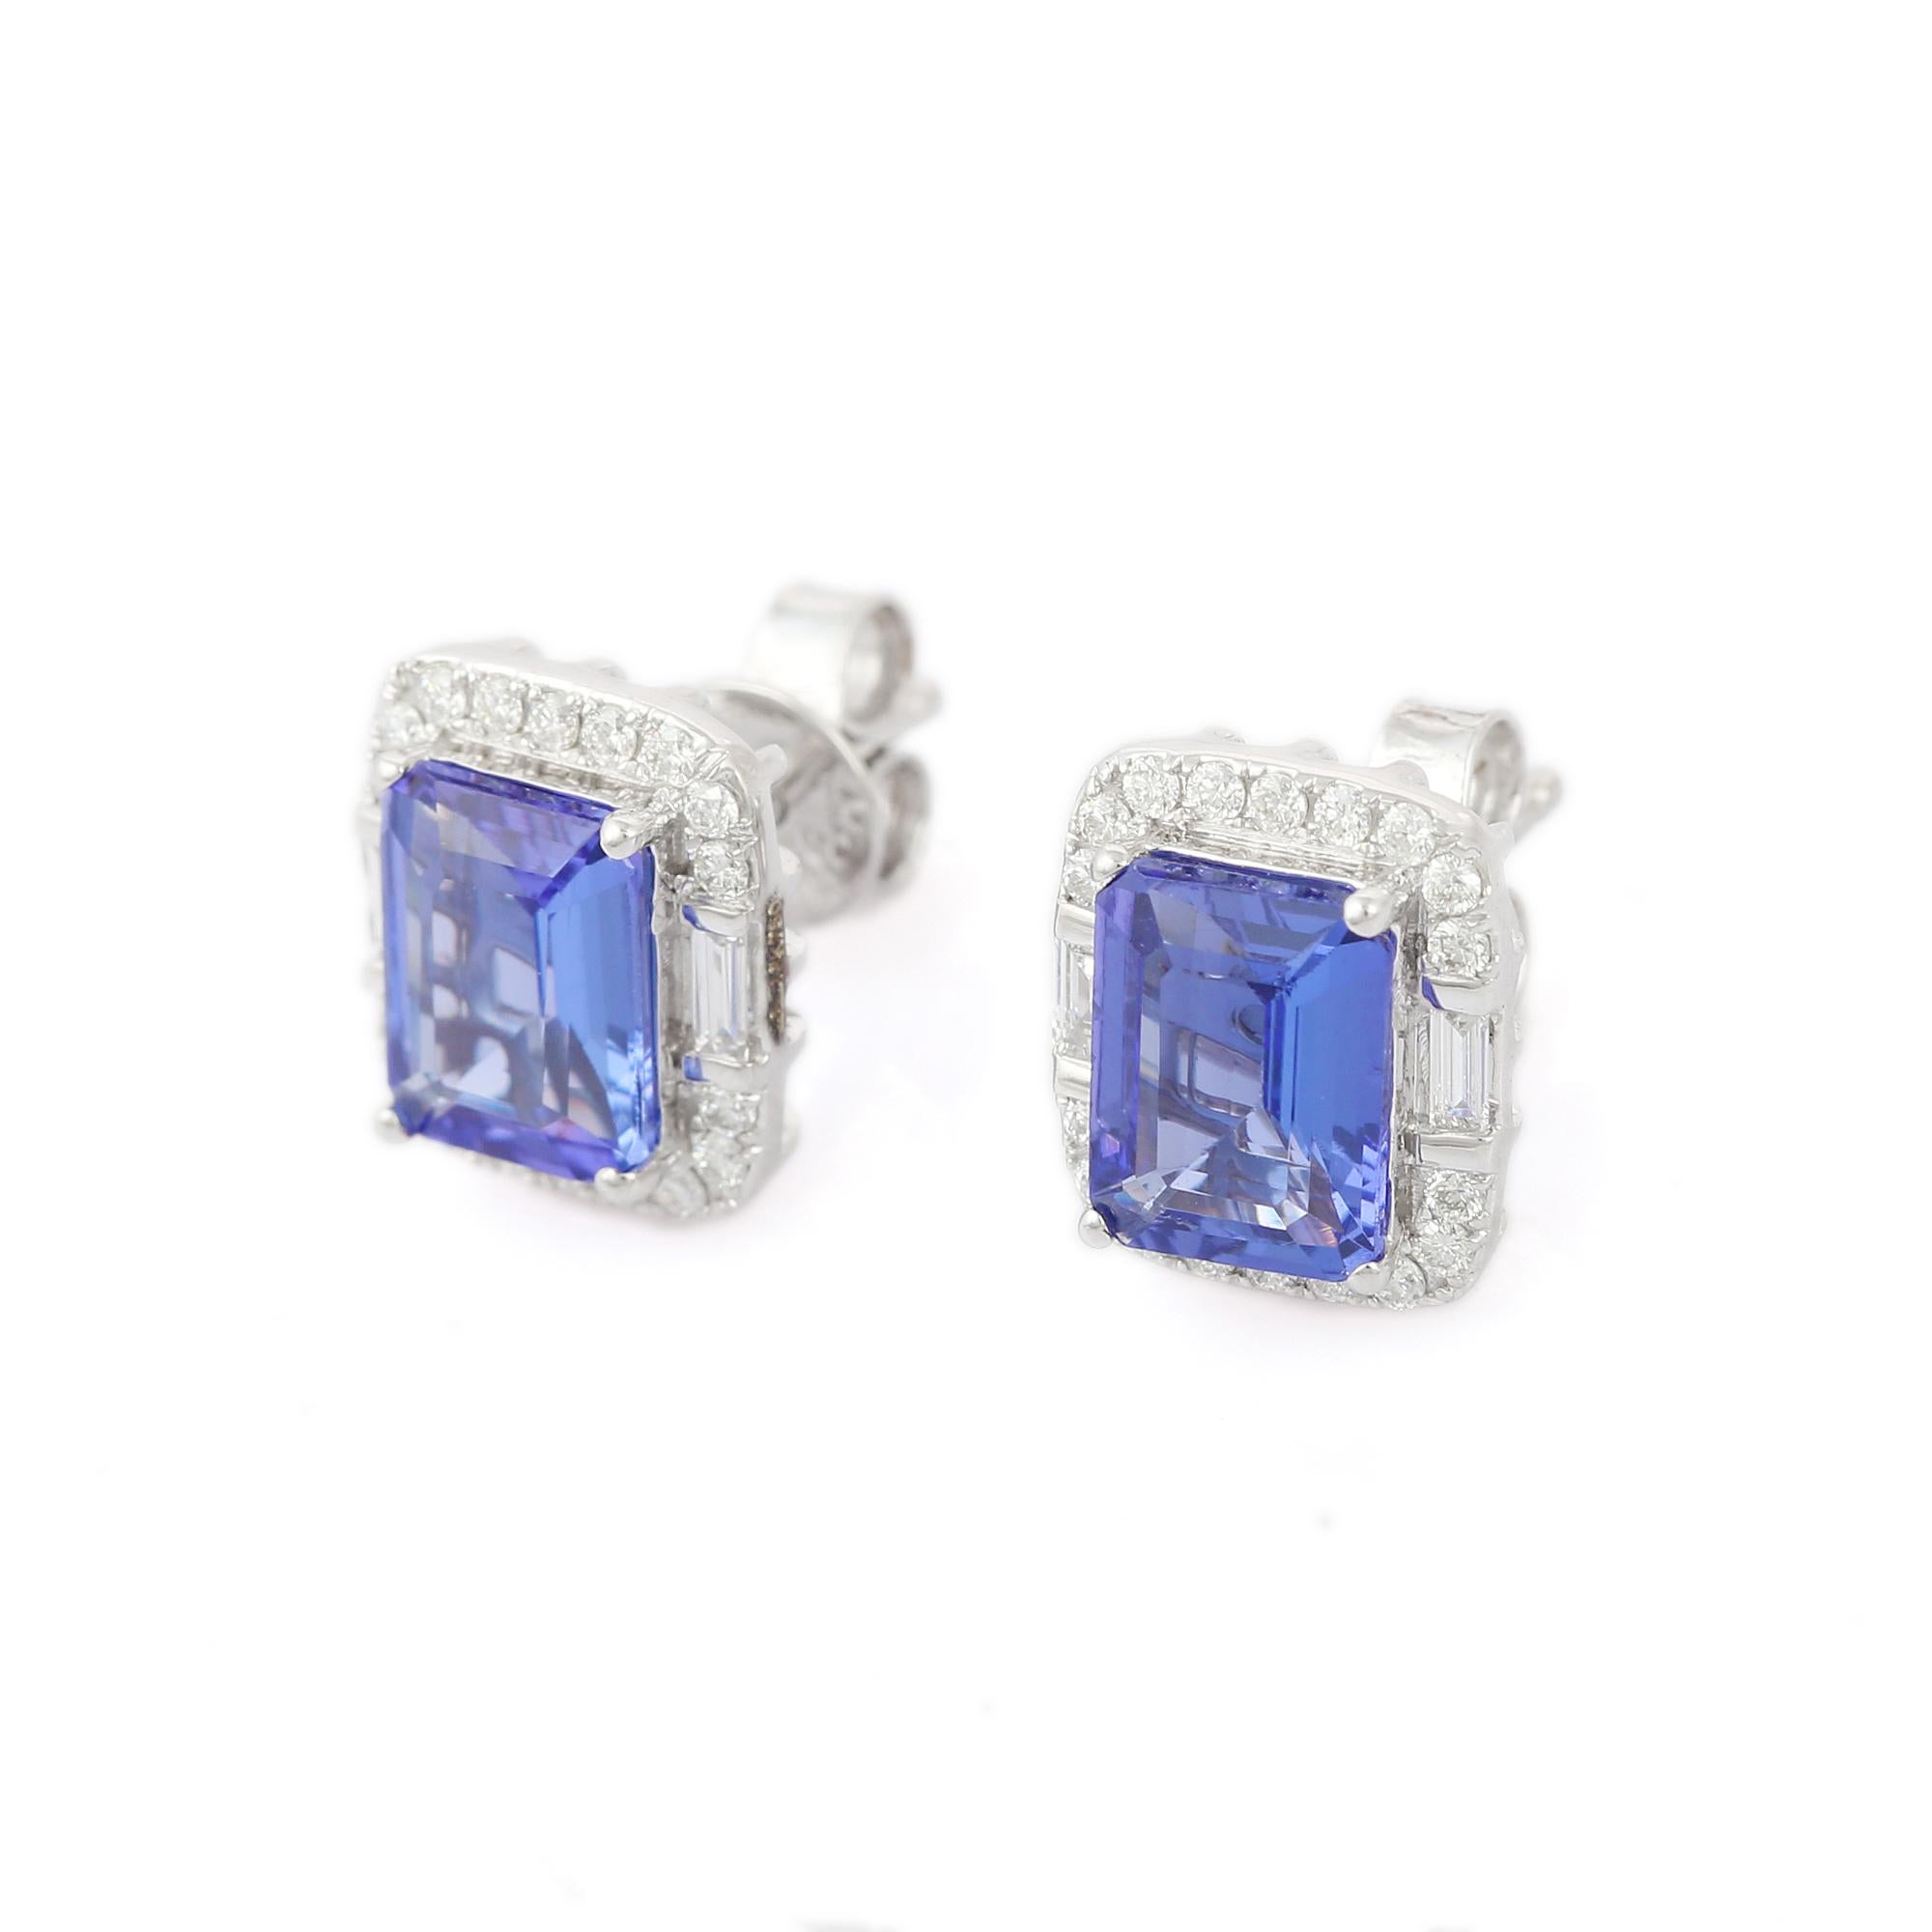 Modern 2.85 Carat Natural Tanzanite and Diamond Stud Earrings in 18K White Gold For Sale